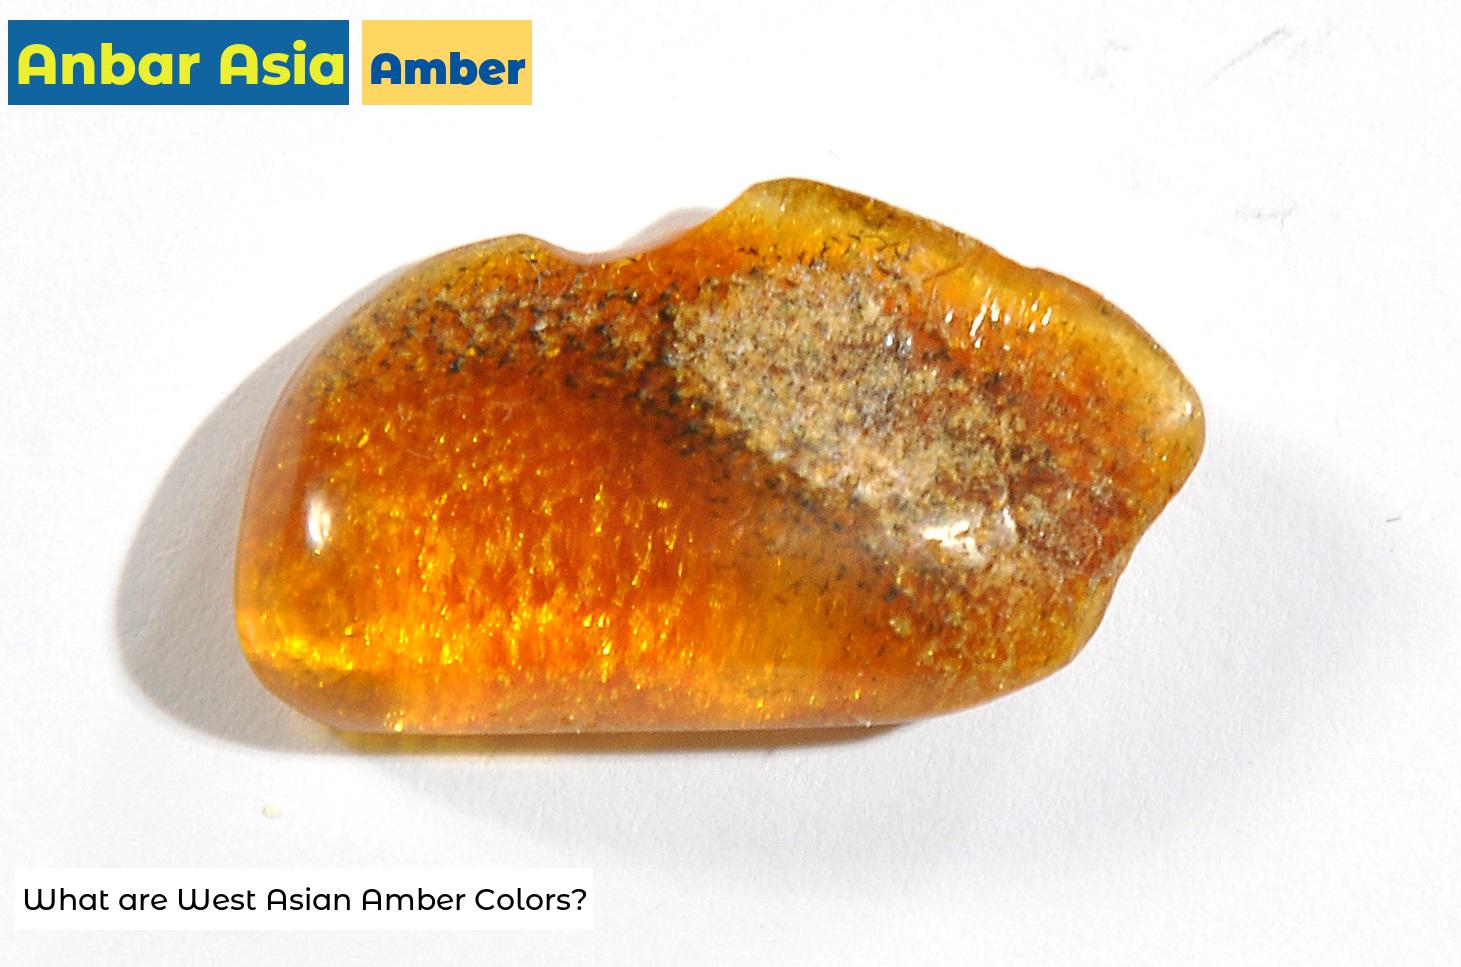 What are West Asian Amber Colors?